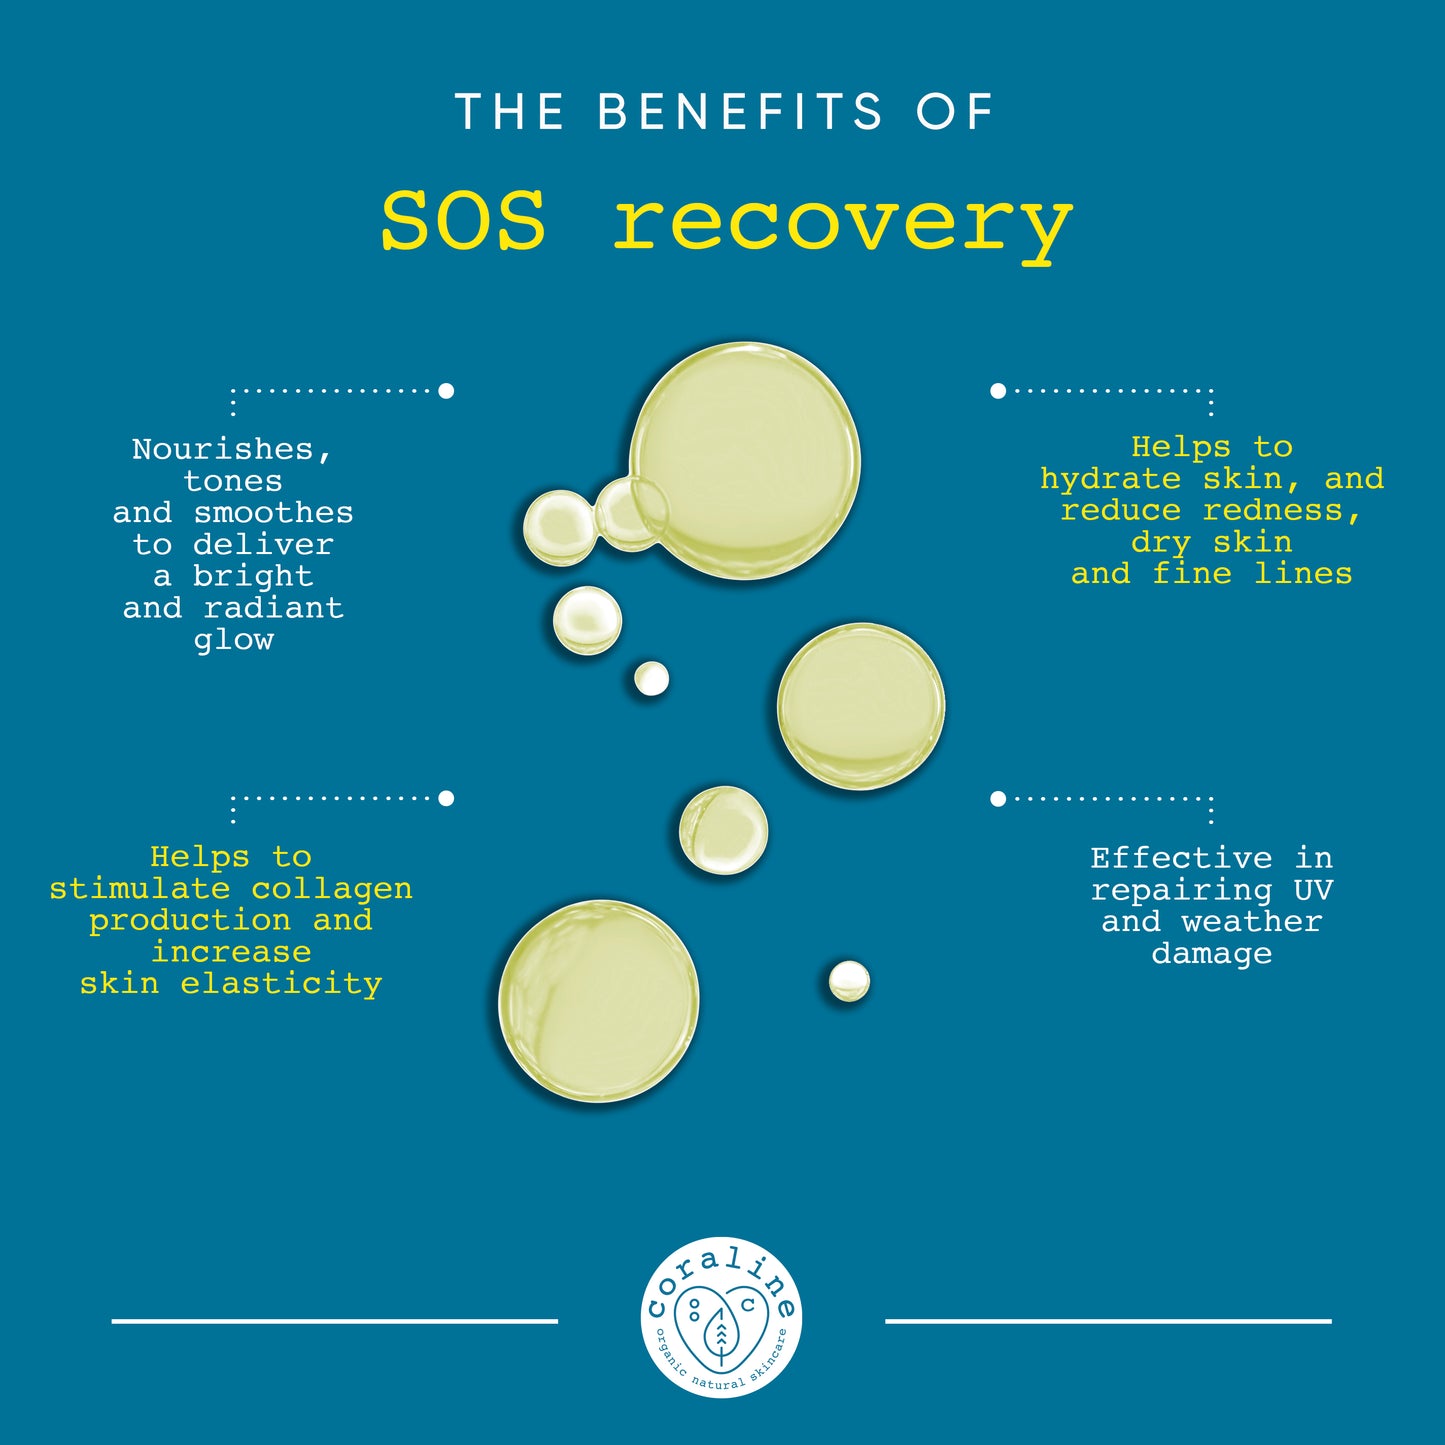 Infographic: A blue background features circular droplets of oil with text detailing the benefits of SOS recovery: nourishes and tones for radiant glow, stimulates collagen for elasticity, hydrates and reduces redness/fine lines, and repairs UV/weather damage.